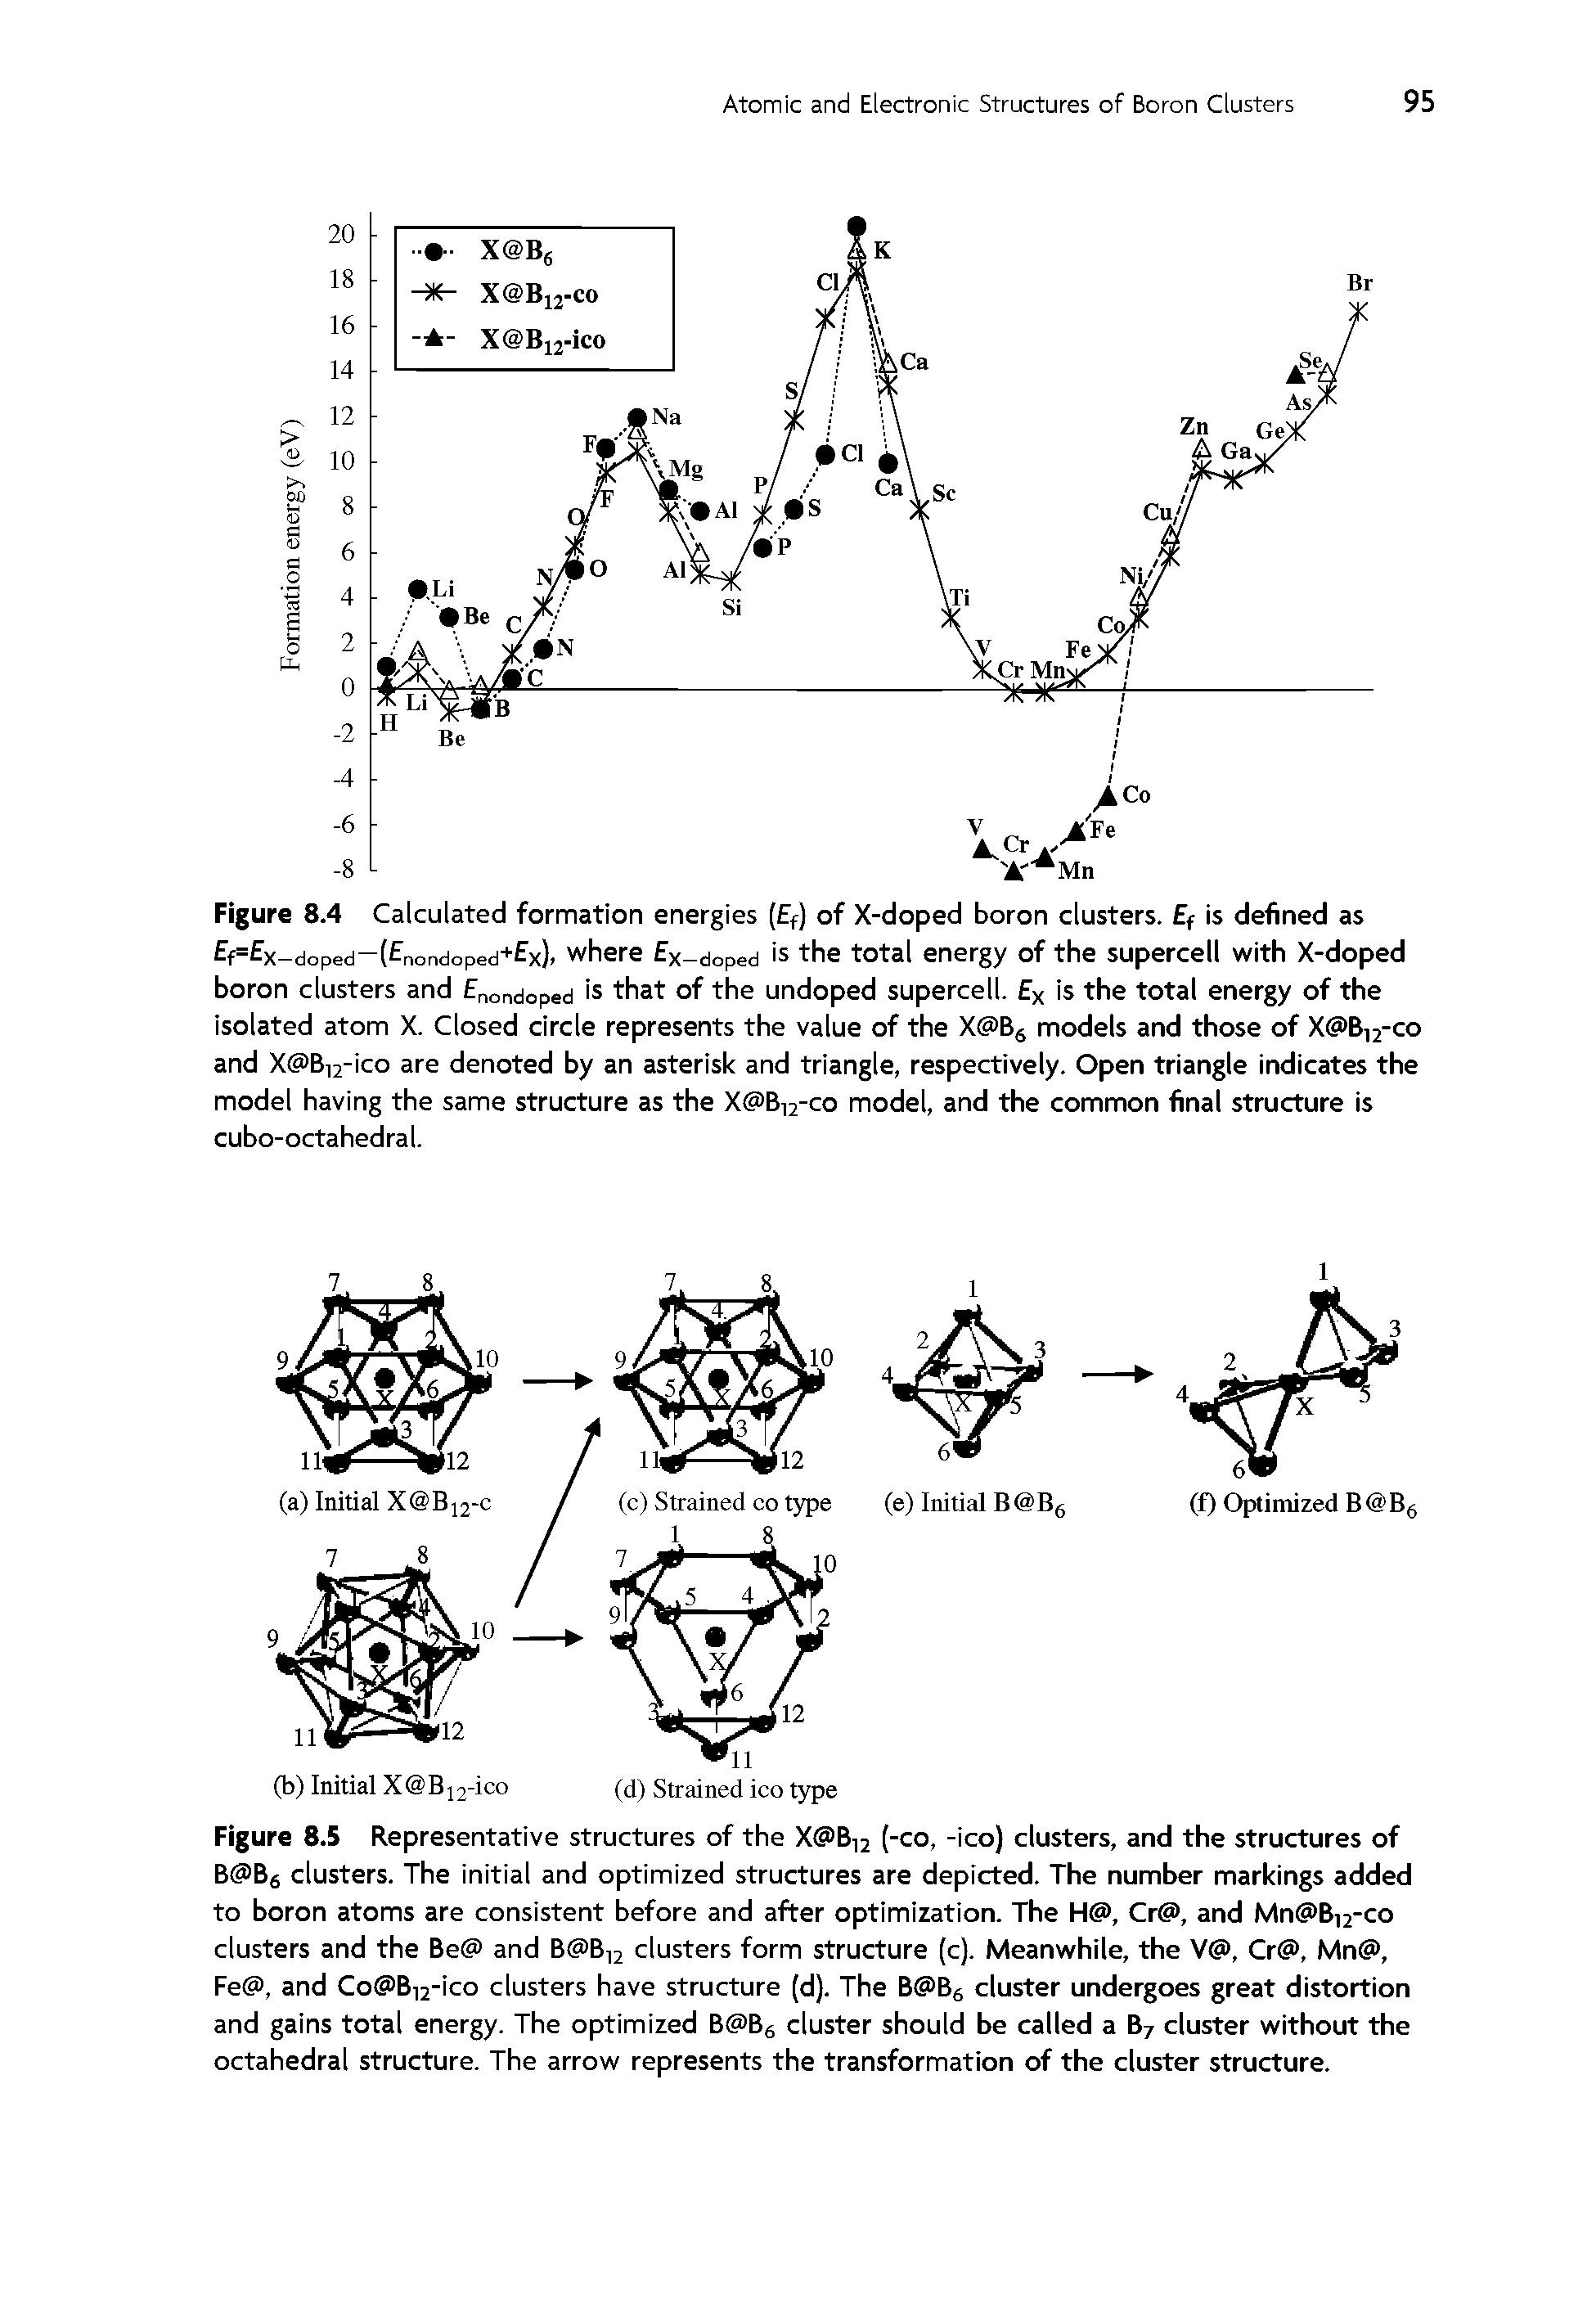 Figure 8.4 Calculated formation energies (Ef) of X-doped boron clusters. Ef is defined as Ef=Ex doped-(Enondoped+Ex), where Ex-doped is the total energy of the supercell with X-doped boron clusters and Enondoped is that of the undoped supercell. Ex is the total energy of the isolated atom X. Closed circle represents the value of the X B6 models and those of X B,2-co and X Birico are denoted by an asterisk and triangle, respectively. Open triangle indicates the model having the same structure as the X Birco model, and the common final structure is cubo-octahedral.